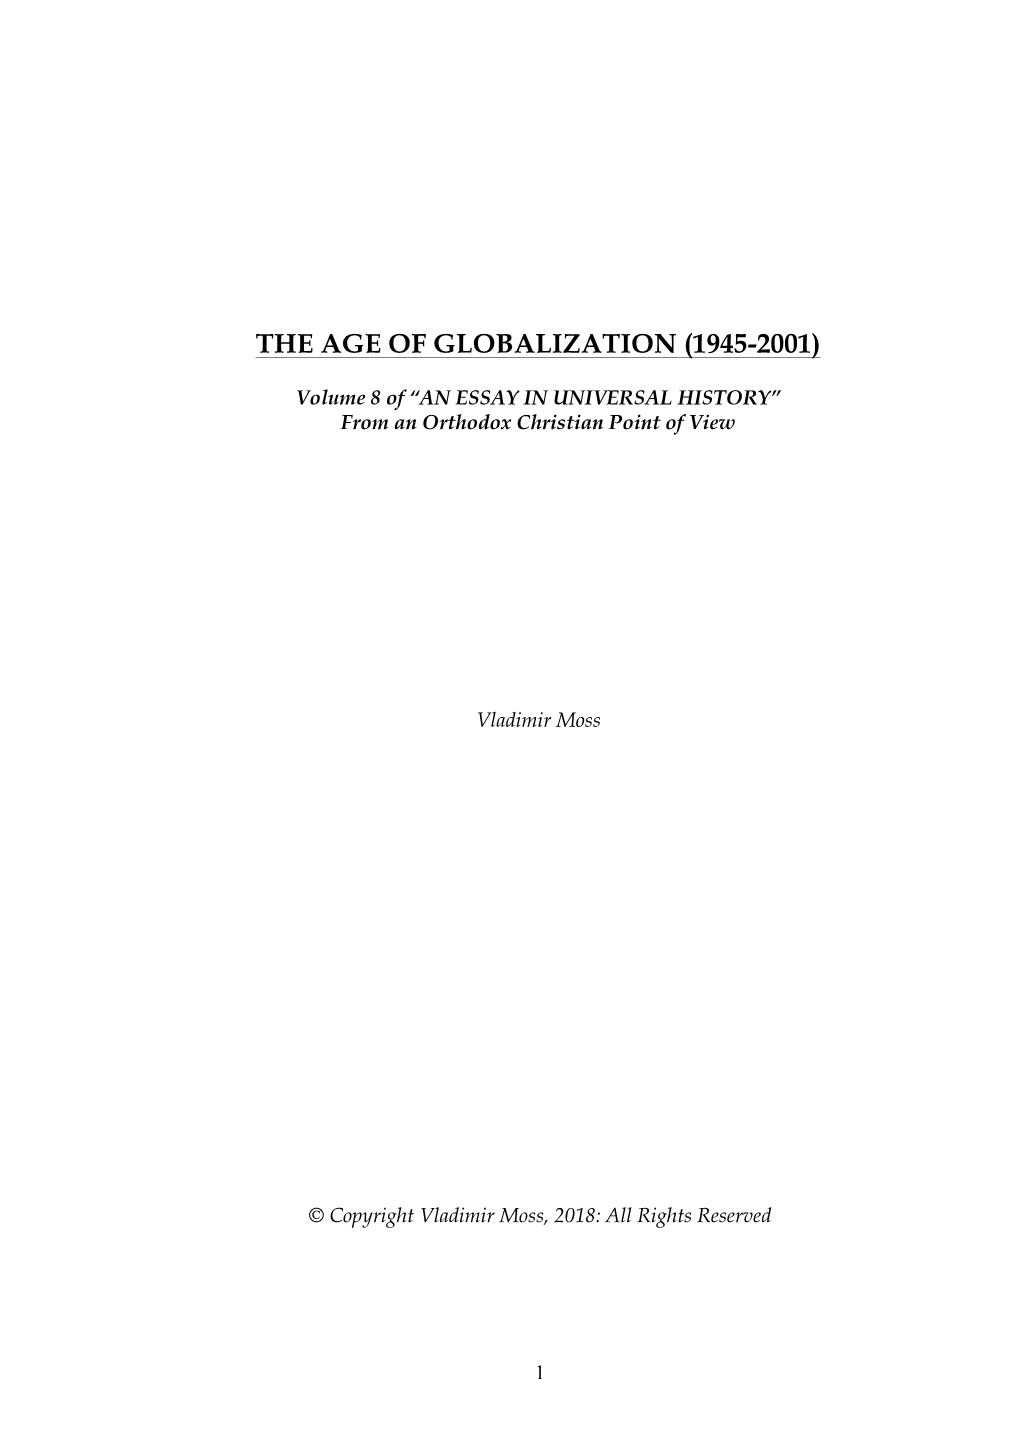 The Age of Globalization (1945-2001)